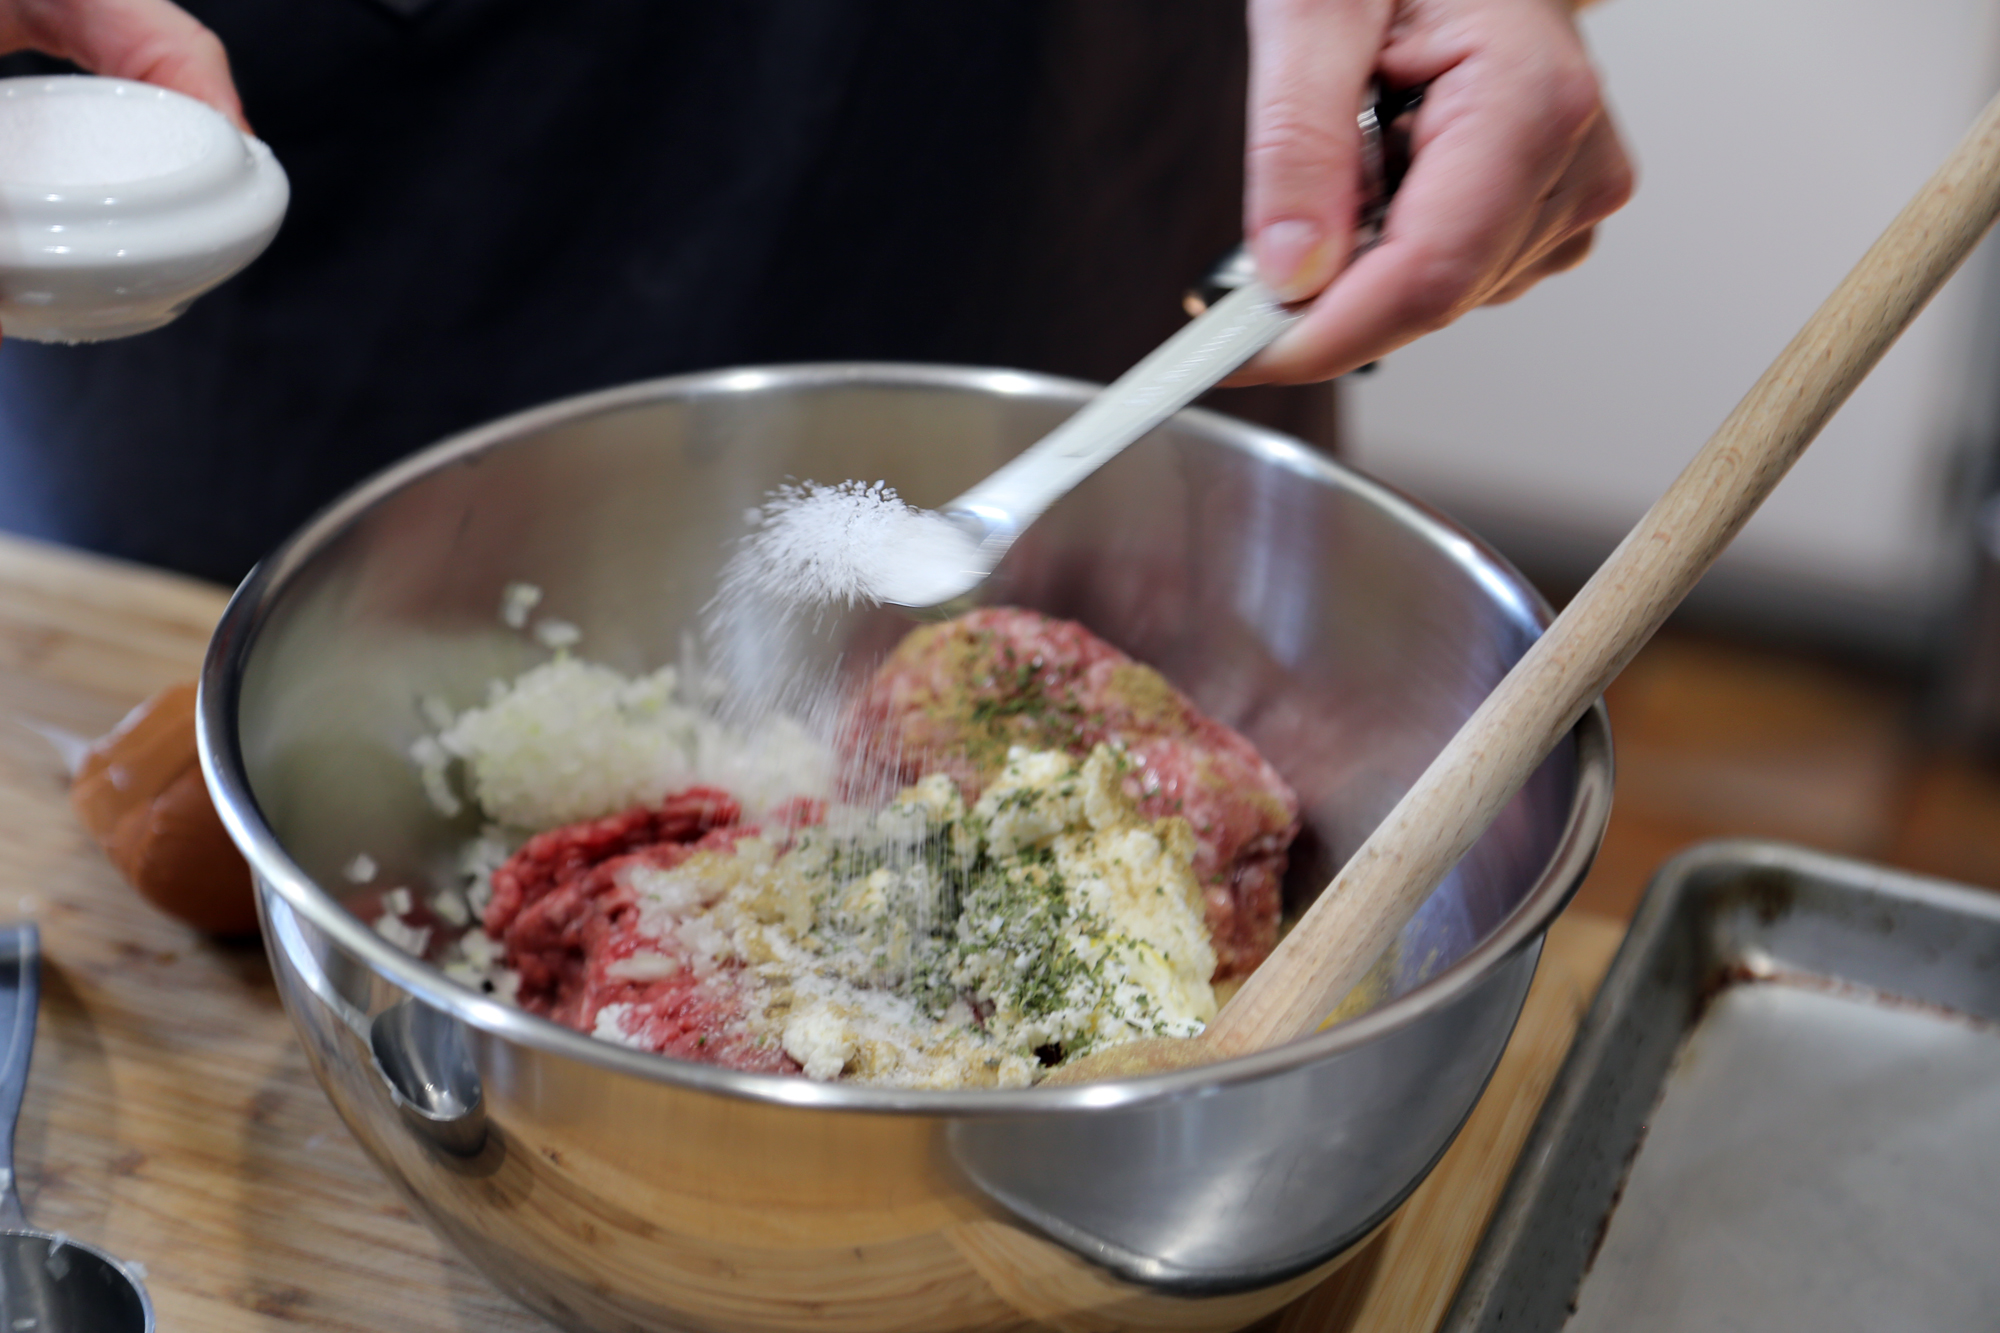 In a large bowl, add the beef, pork, eggs, ricotta, bread crumbs, salt, fennel, and oregano.